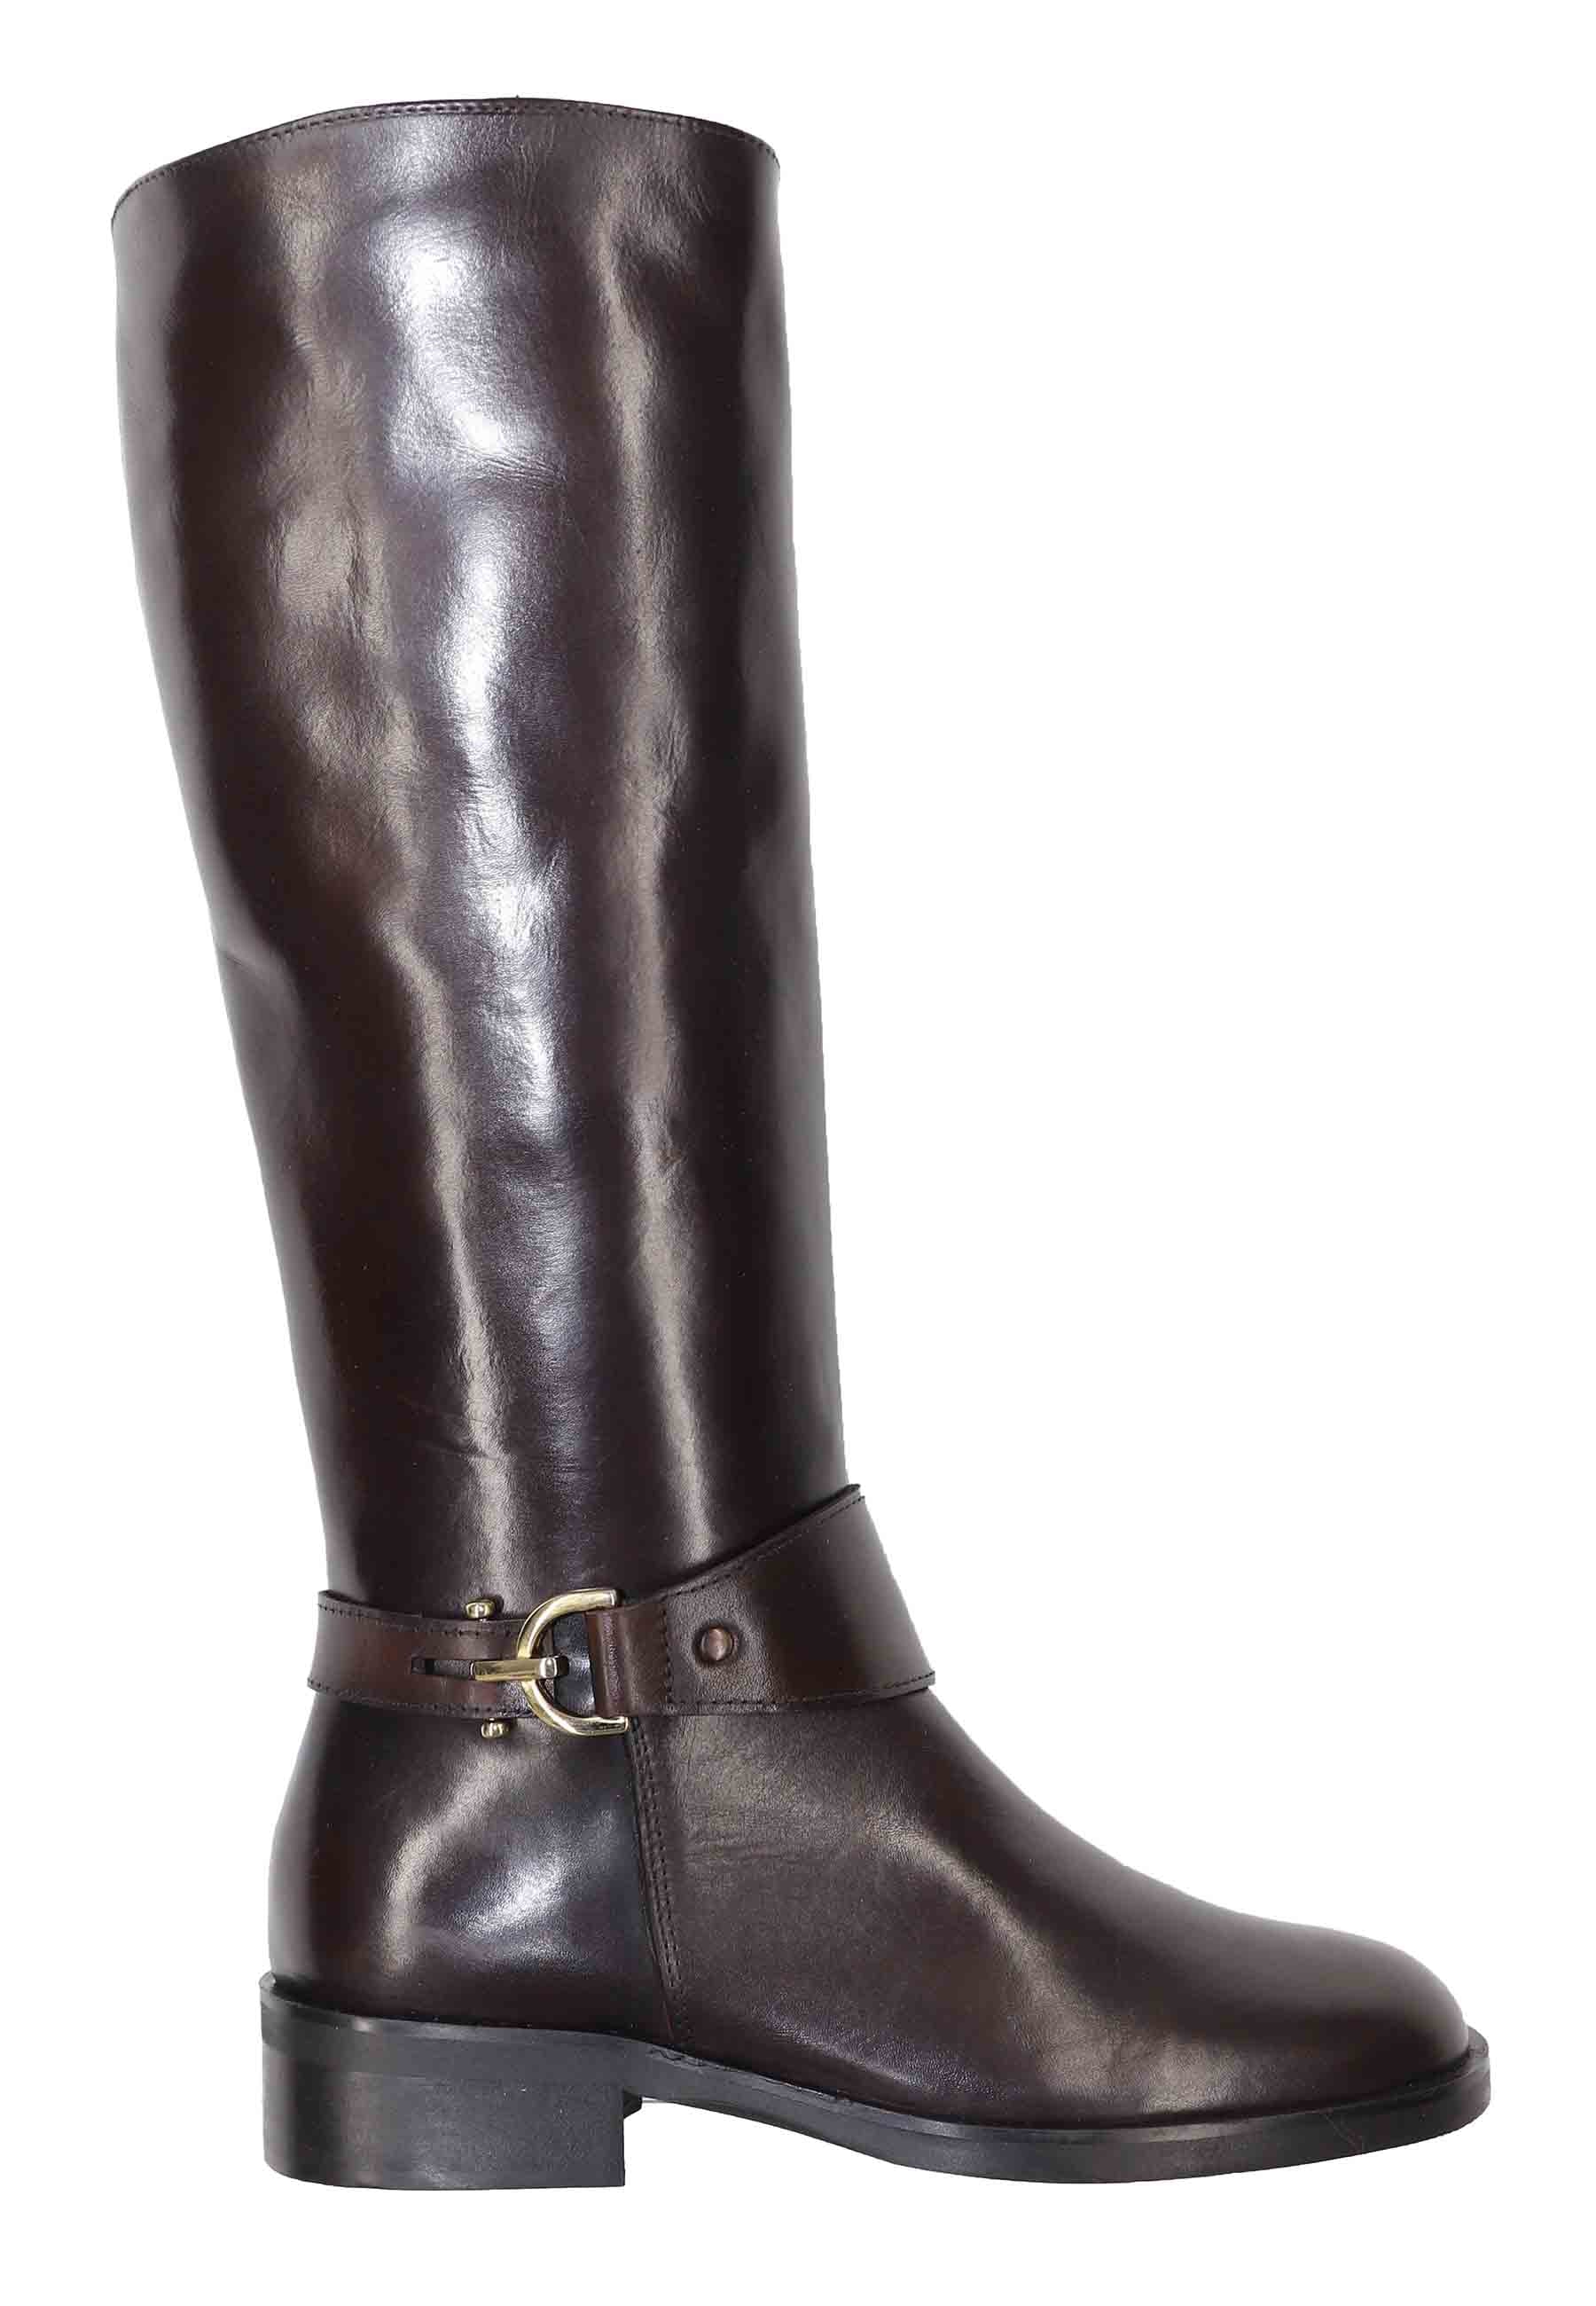 Women's brown leather boots with low heel buckle